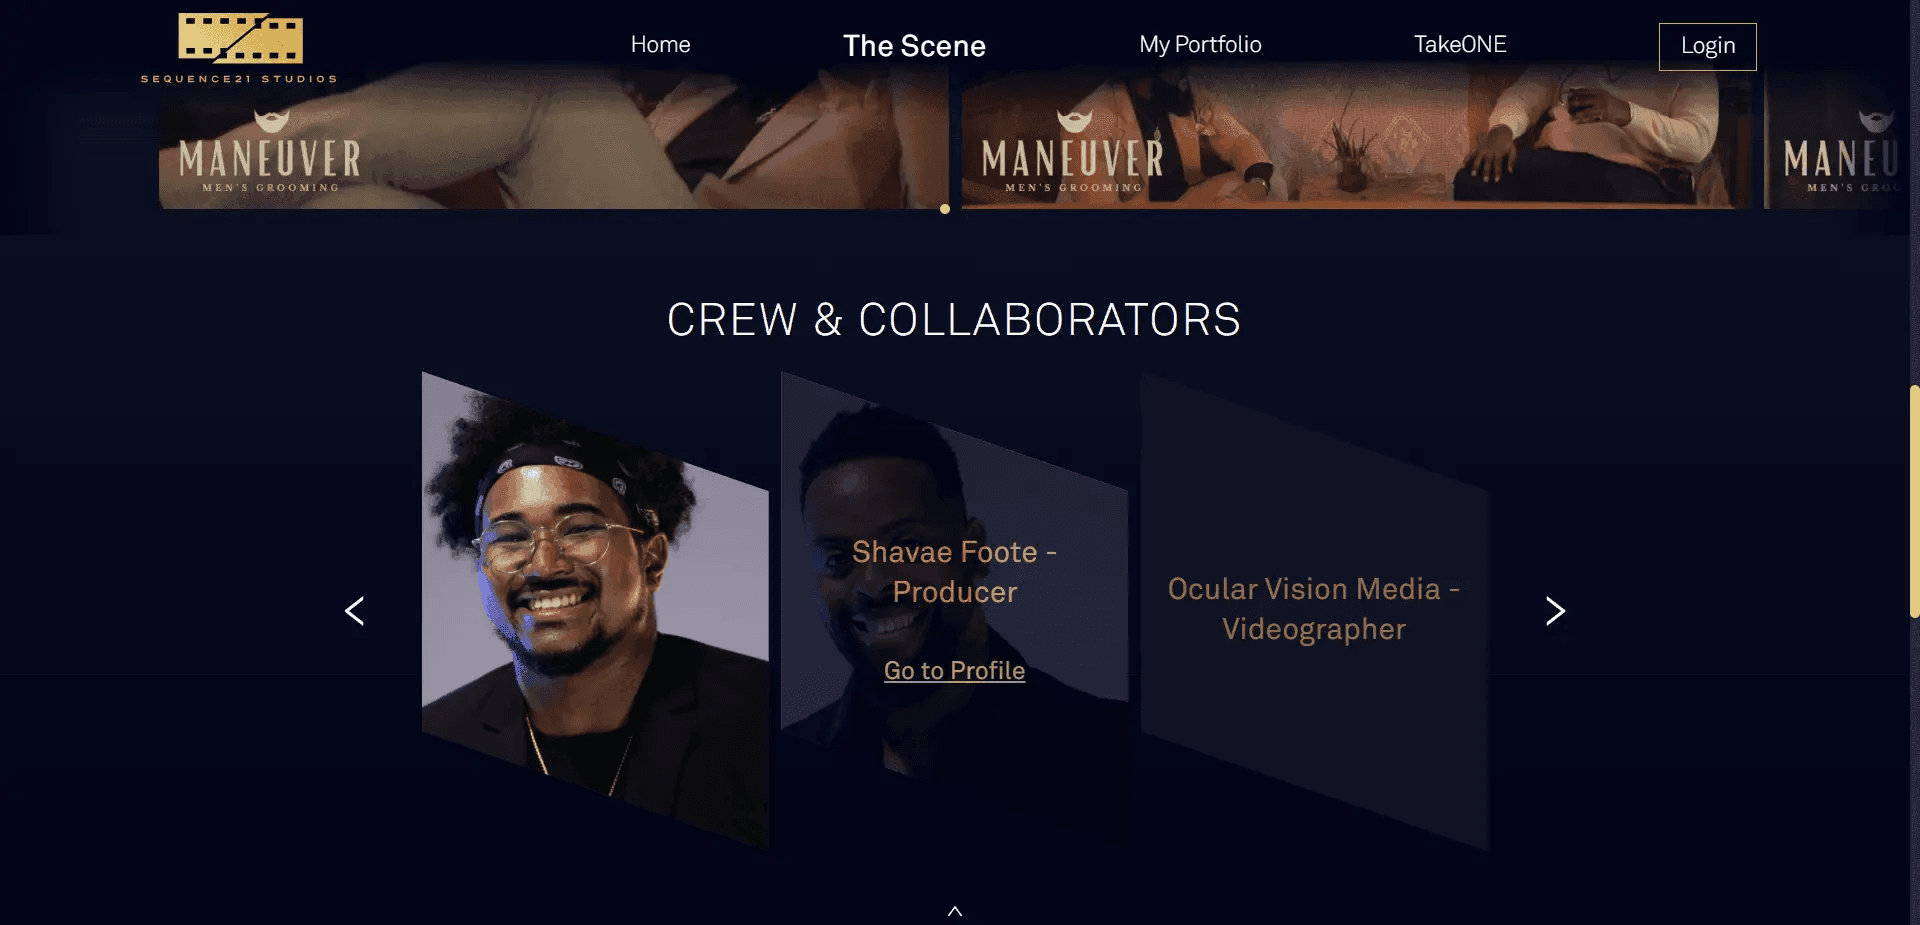 The crew and collaborators of a project have their own special shout-out section